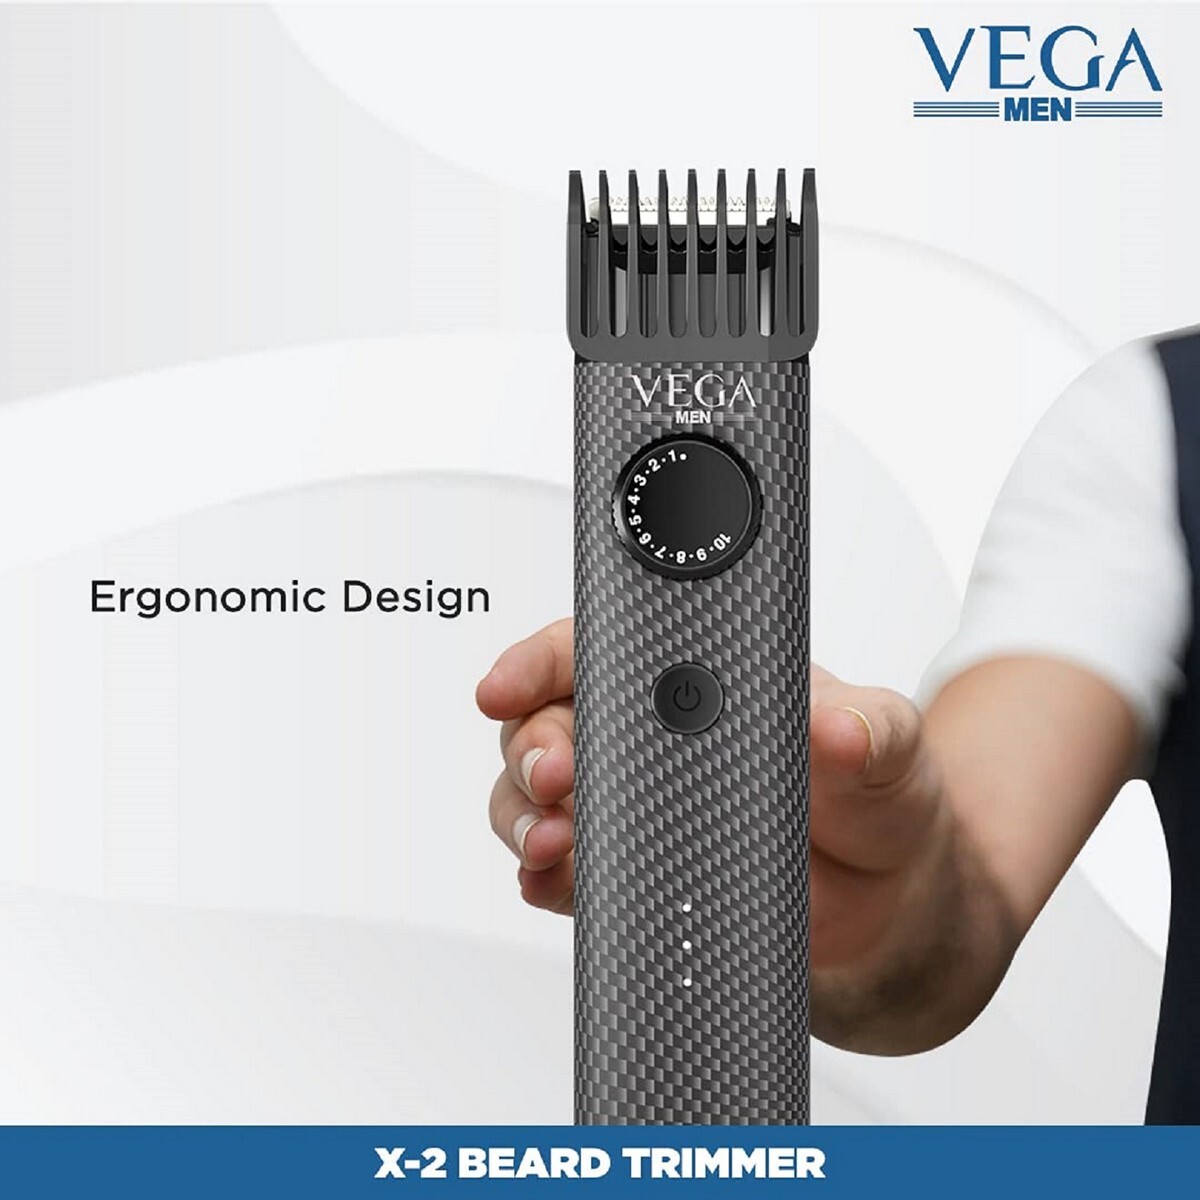 Vega Men X2 Beard Trimmer For Men With Quick Charge, 90 Mins Run-time, Waterproof, For Cord & Cordless Use And 40 Length Settings, VHTH-17